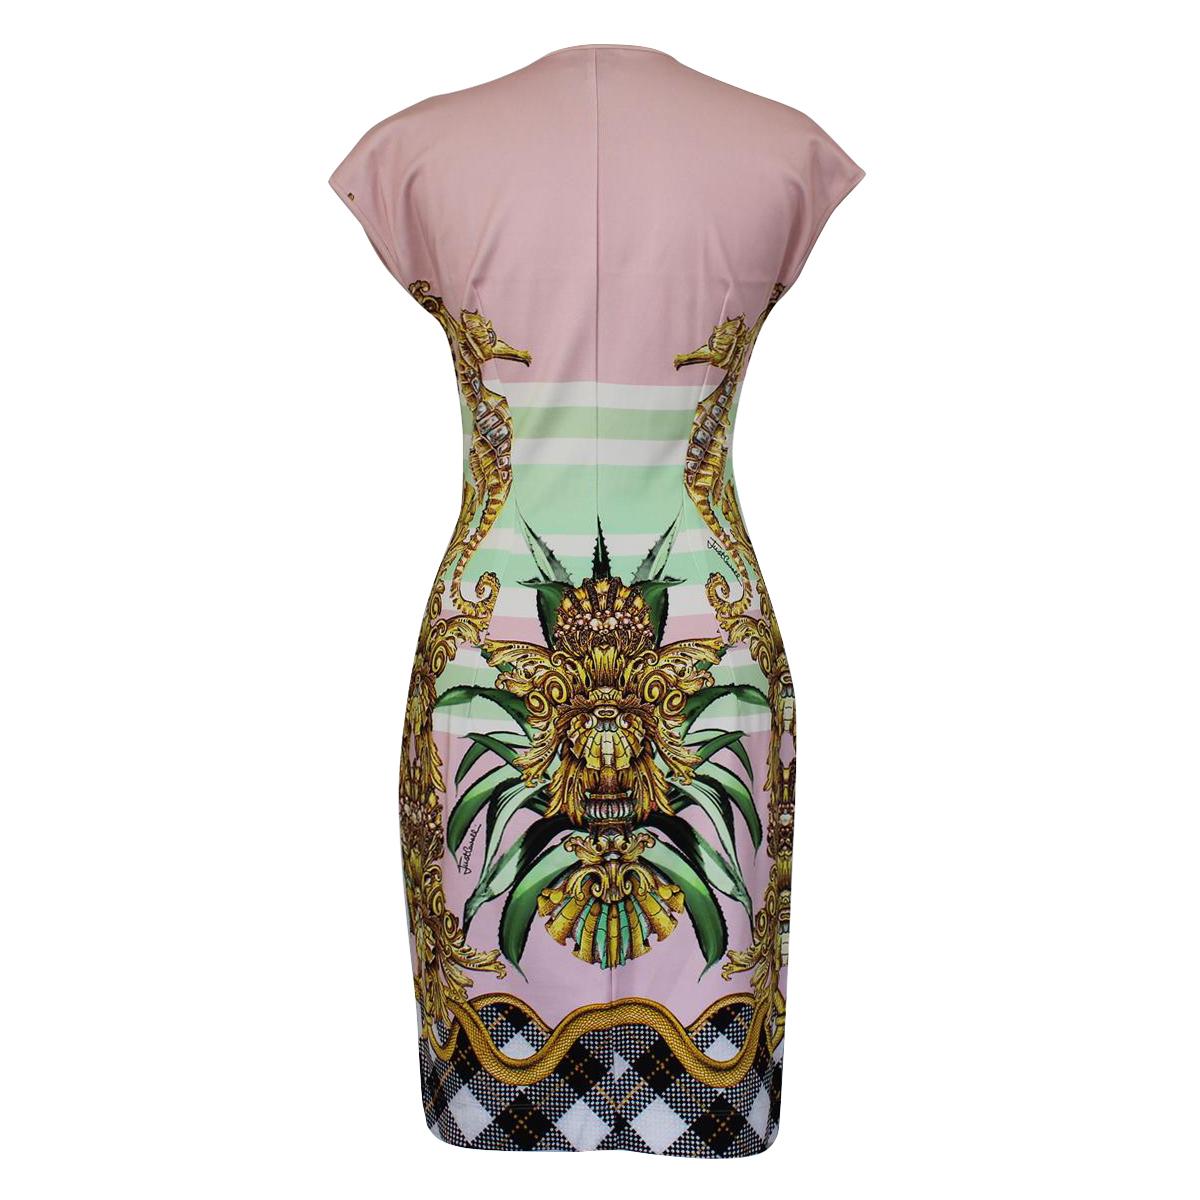 Beautiful Just Cavalli printed dress
Viscose (87%) and elasthane
Fancy print
Multicolored
Sleeveless
Total lenght (shoulder/hem) cm 85 (33.4 inches)
Worldwide express shipping included in the price !